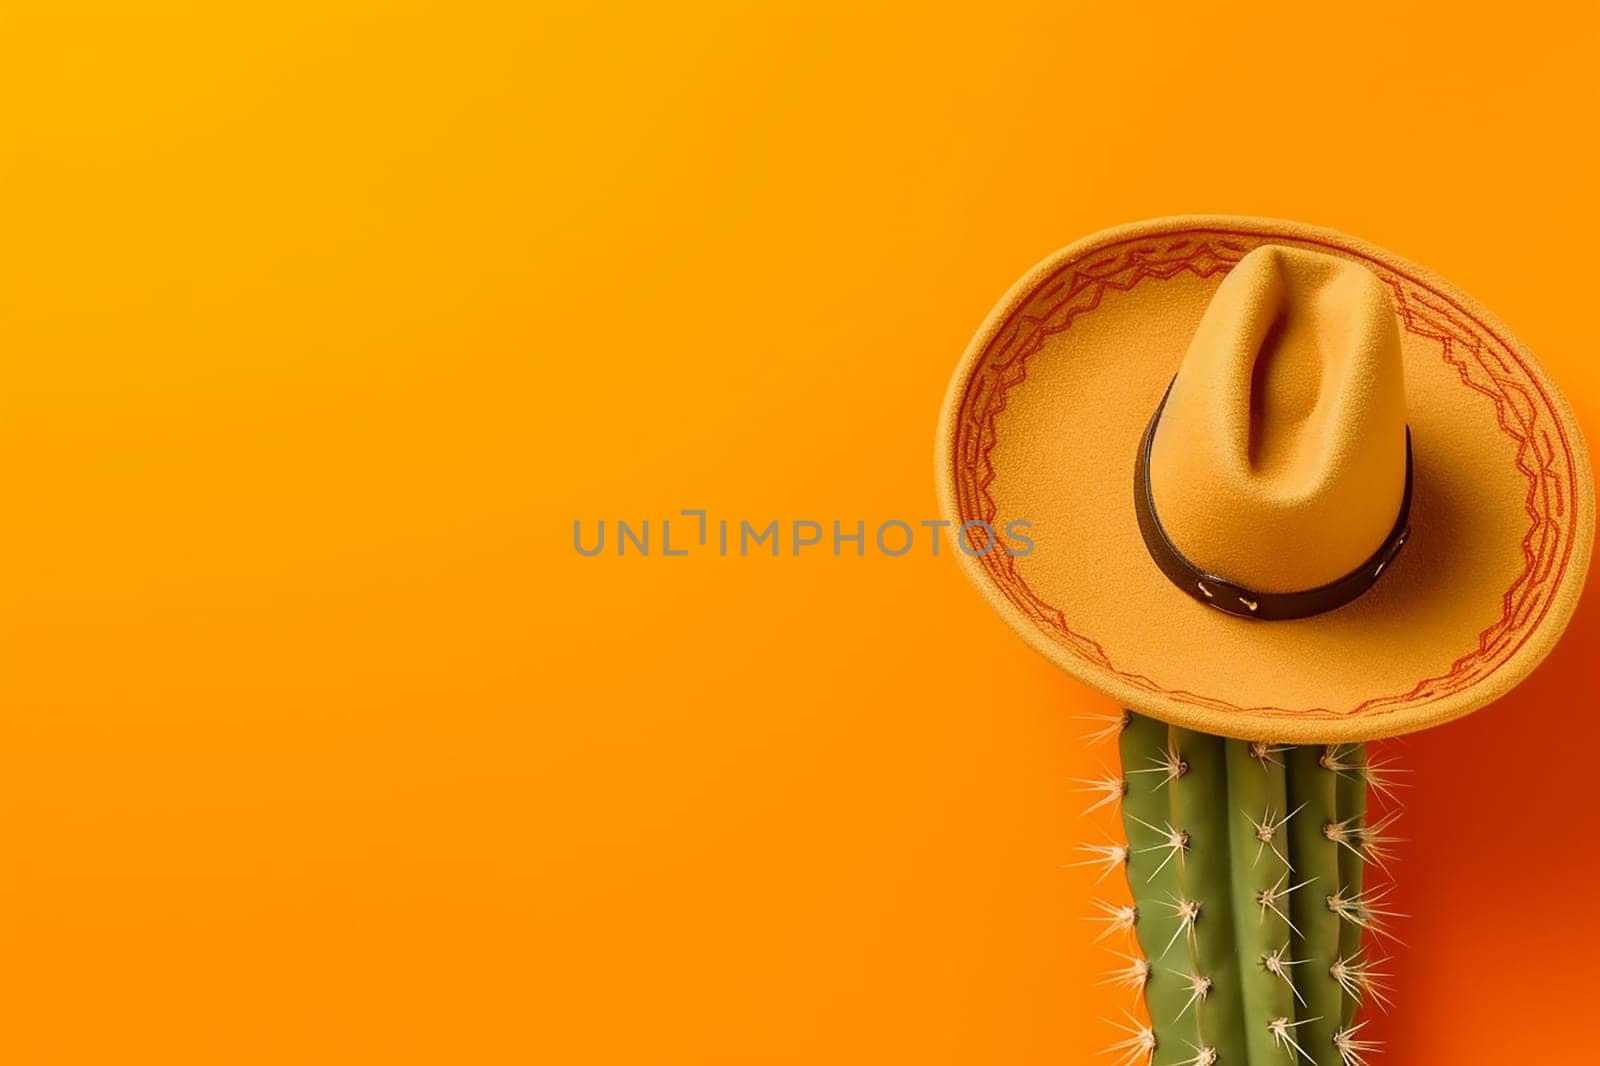 Sombrero on a cactus against an orange background. by Hype2art